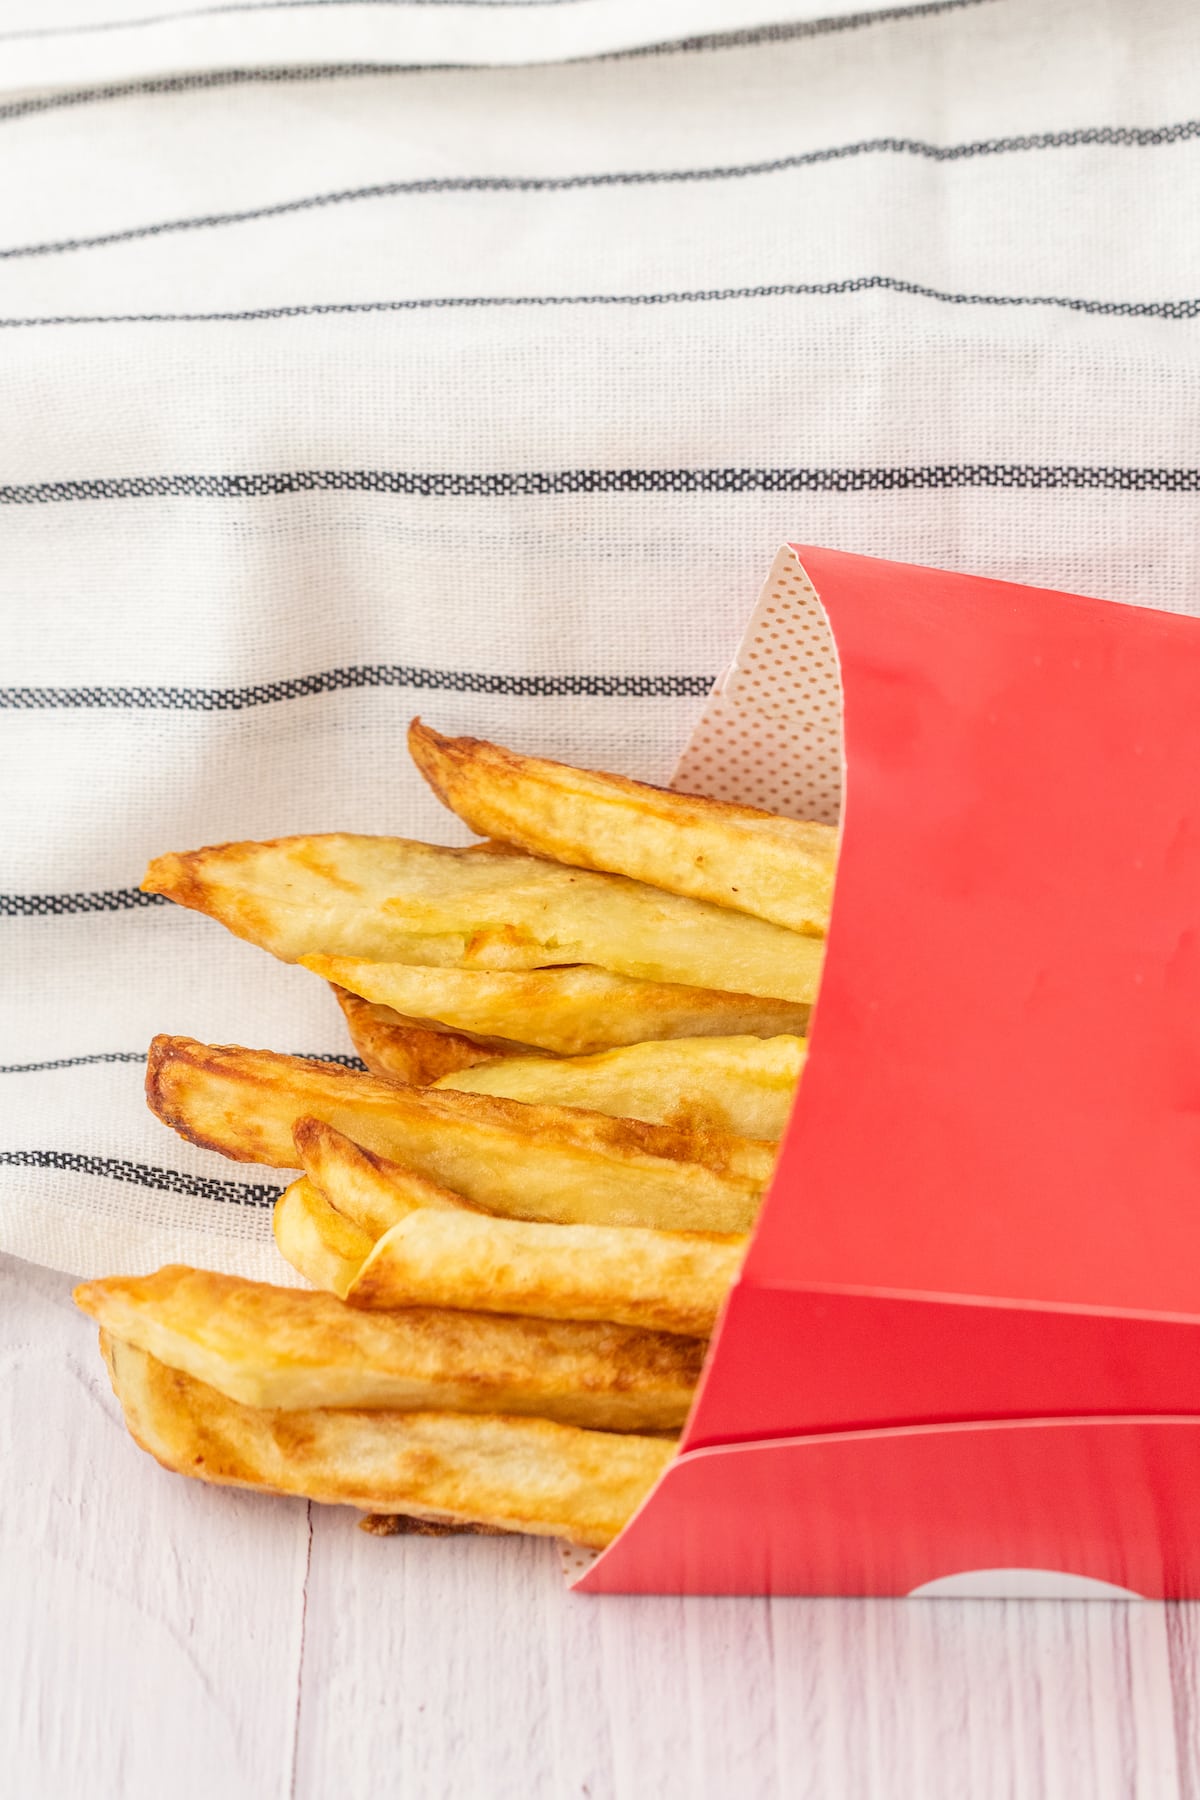 crispy fried french fries in a red paper sleeve